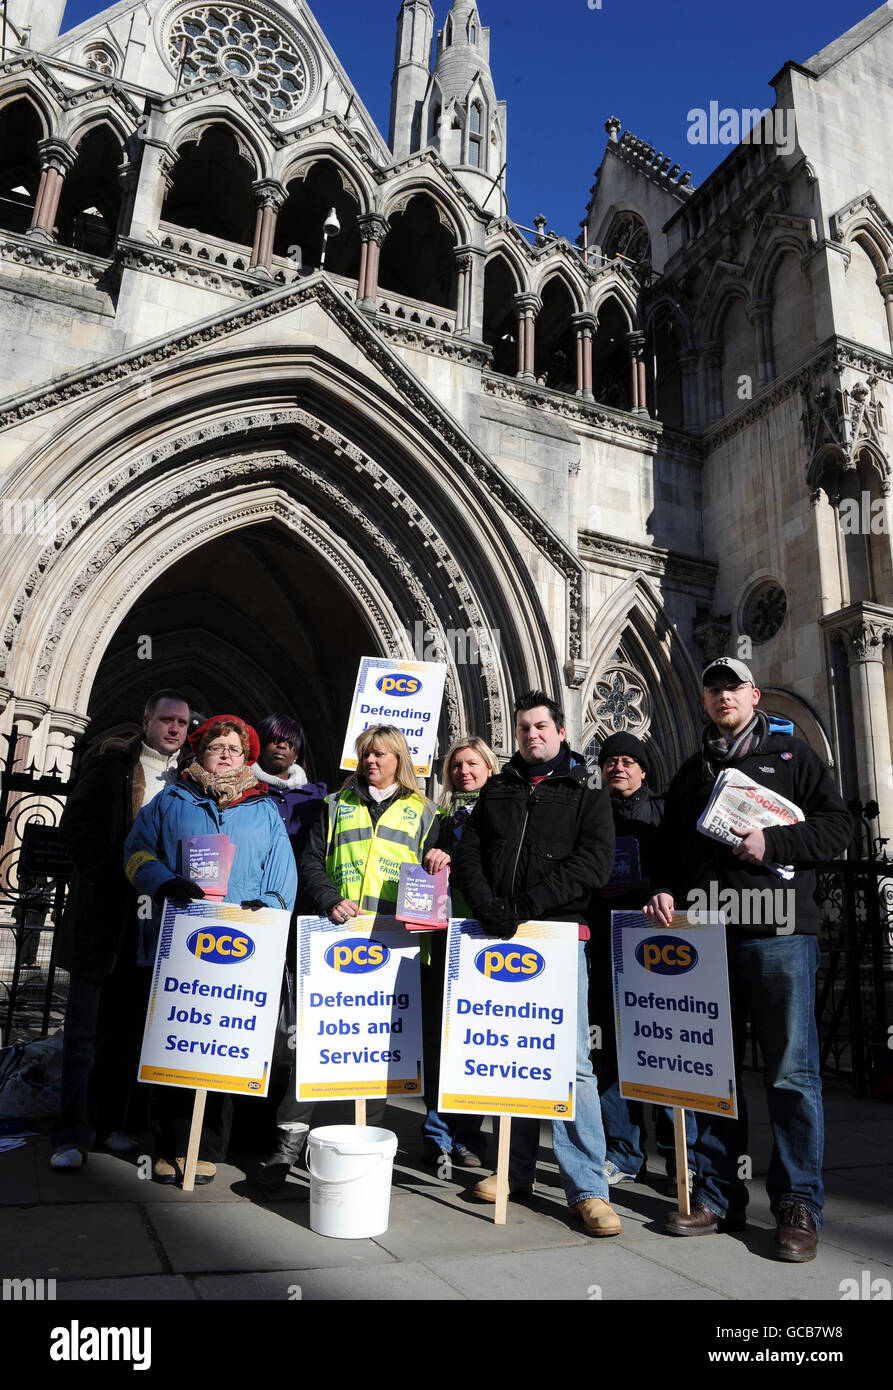 Staff from the Royal Courts of Justice, London take part in a 48 hour strike by Public and Commercial Services organised by the PCS, which is disputing the government's proposed changes to existing pension and compensation arrangements. Stock Photo